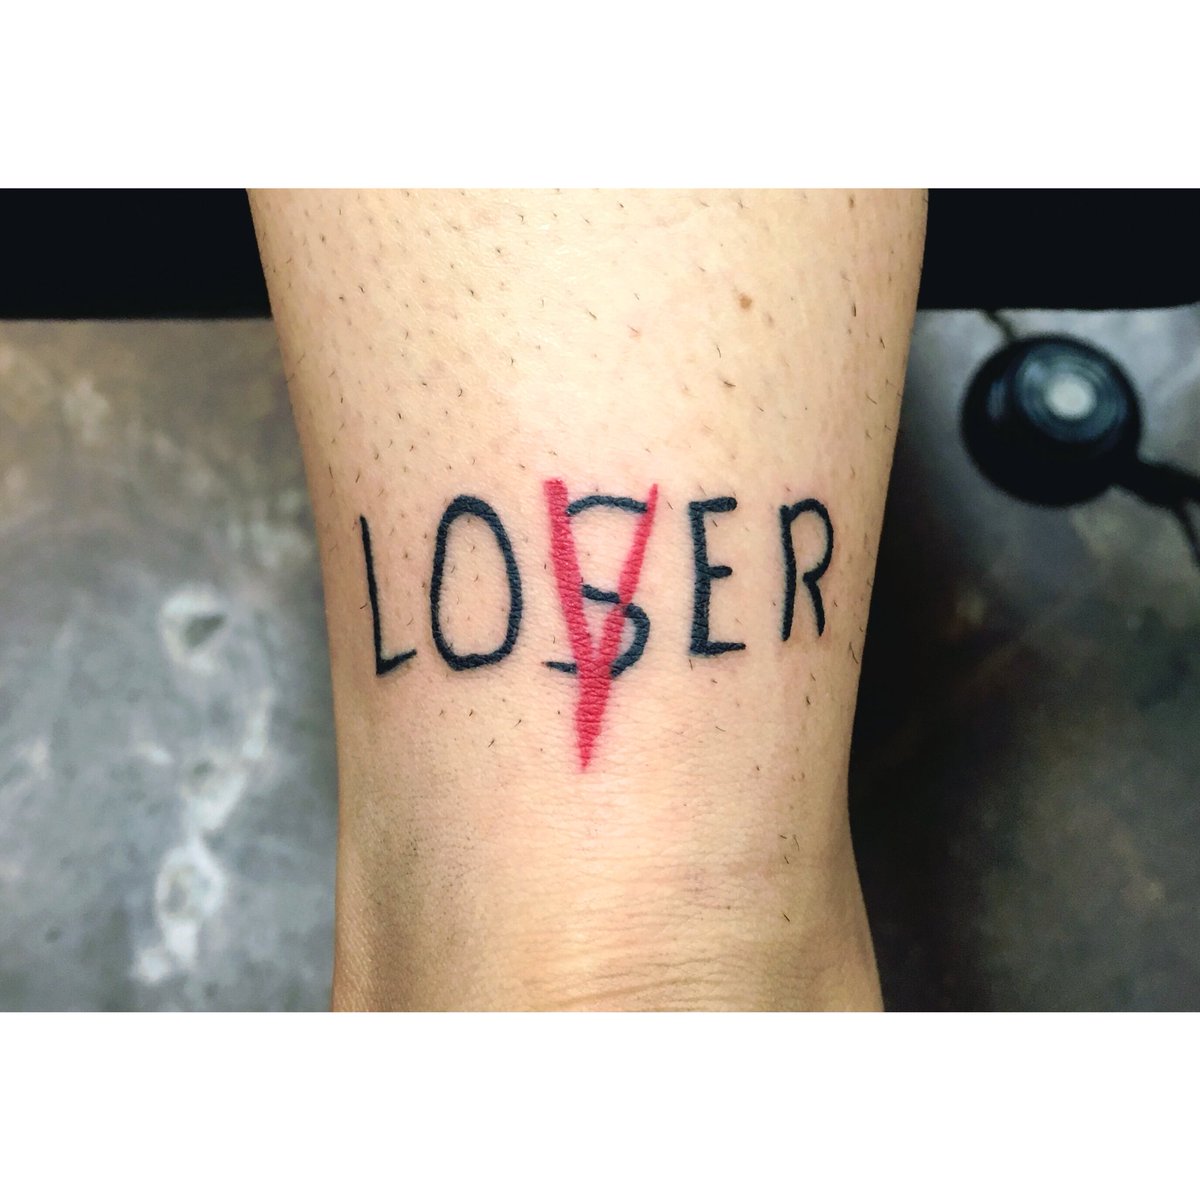 Are you a Loser or Lover? - Learning How To Tattoo - Tattoo Talk – Vlog -  YouTube